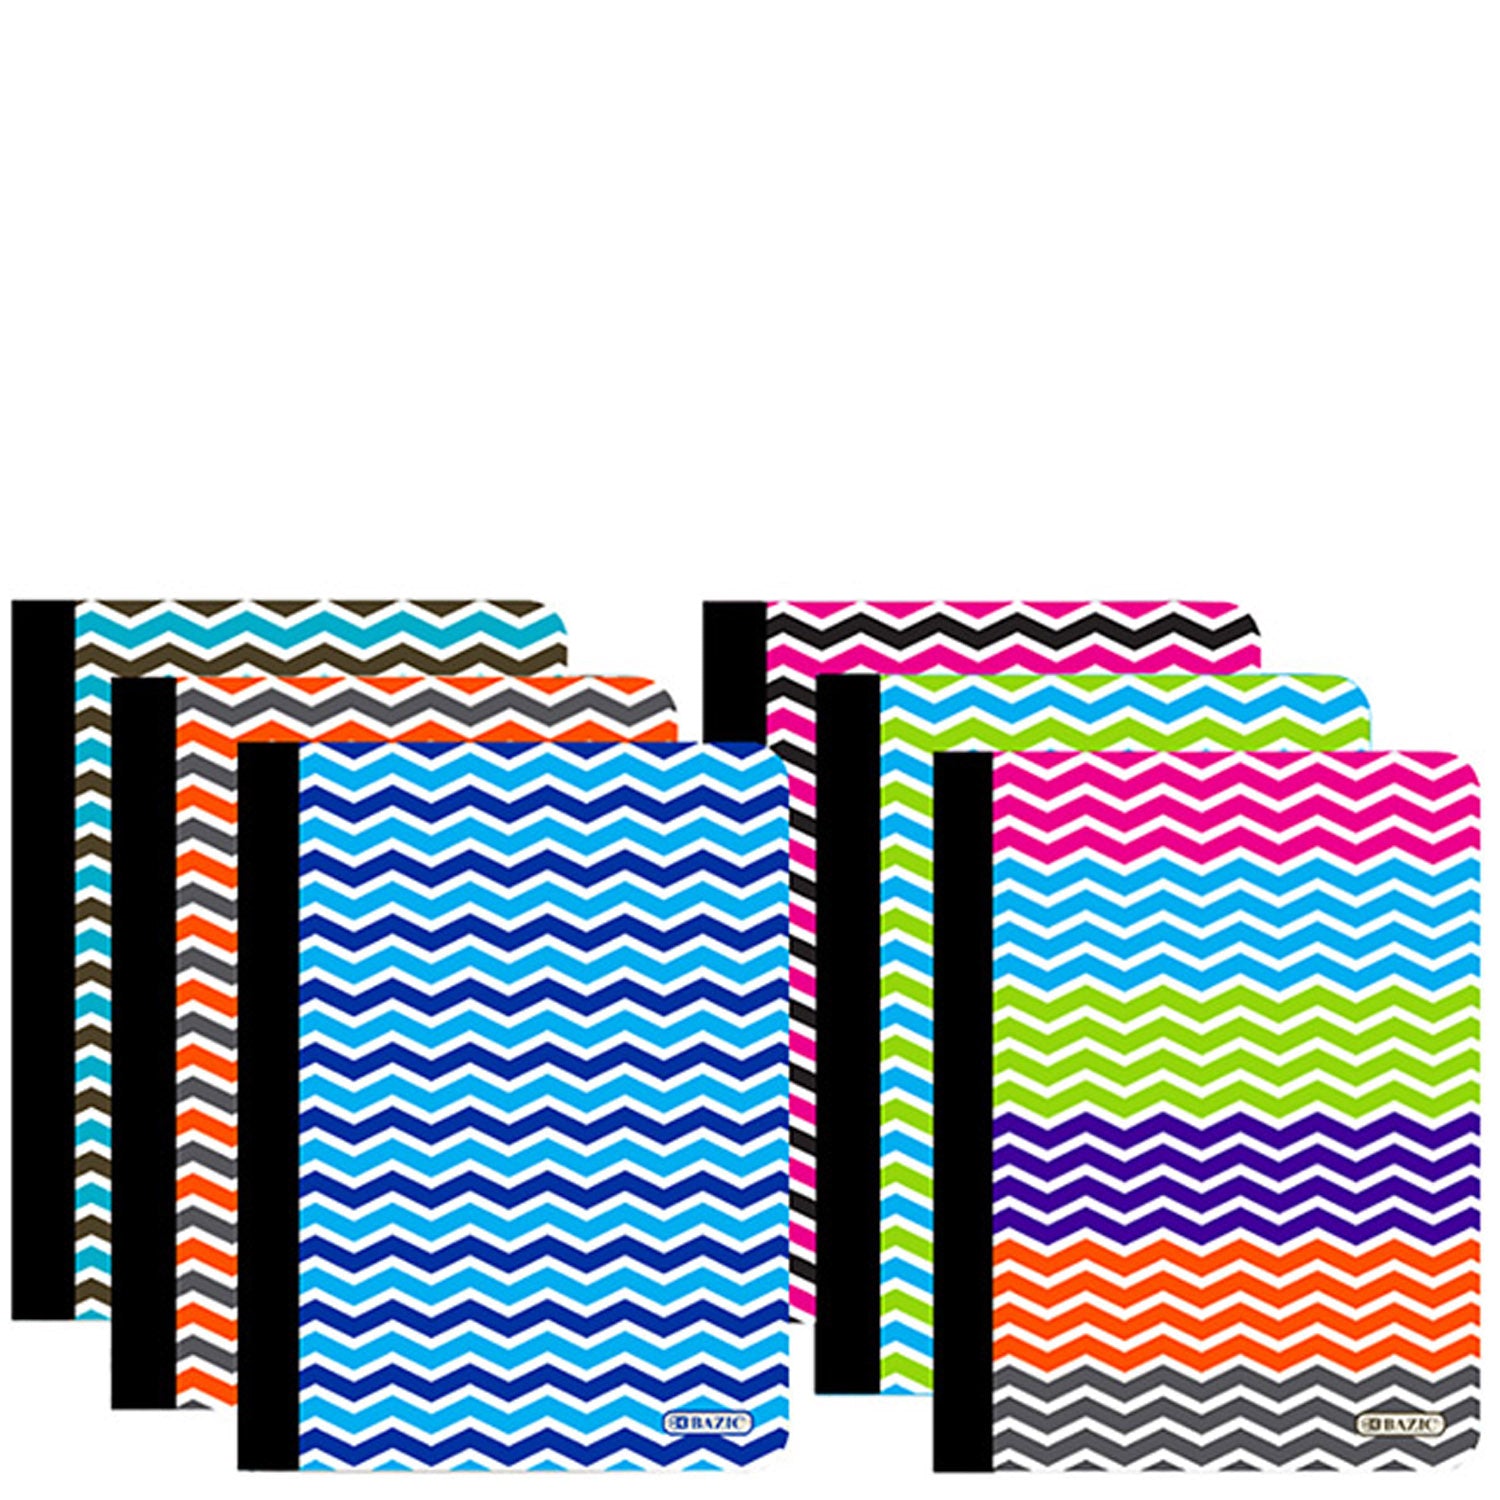 Composition Book College Ruled 100-Ct | Assorted Chevron Cover